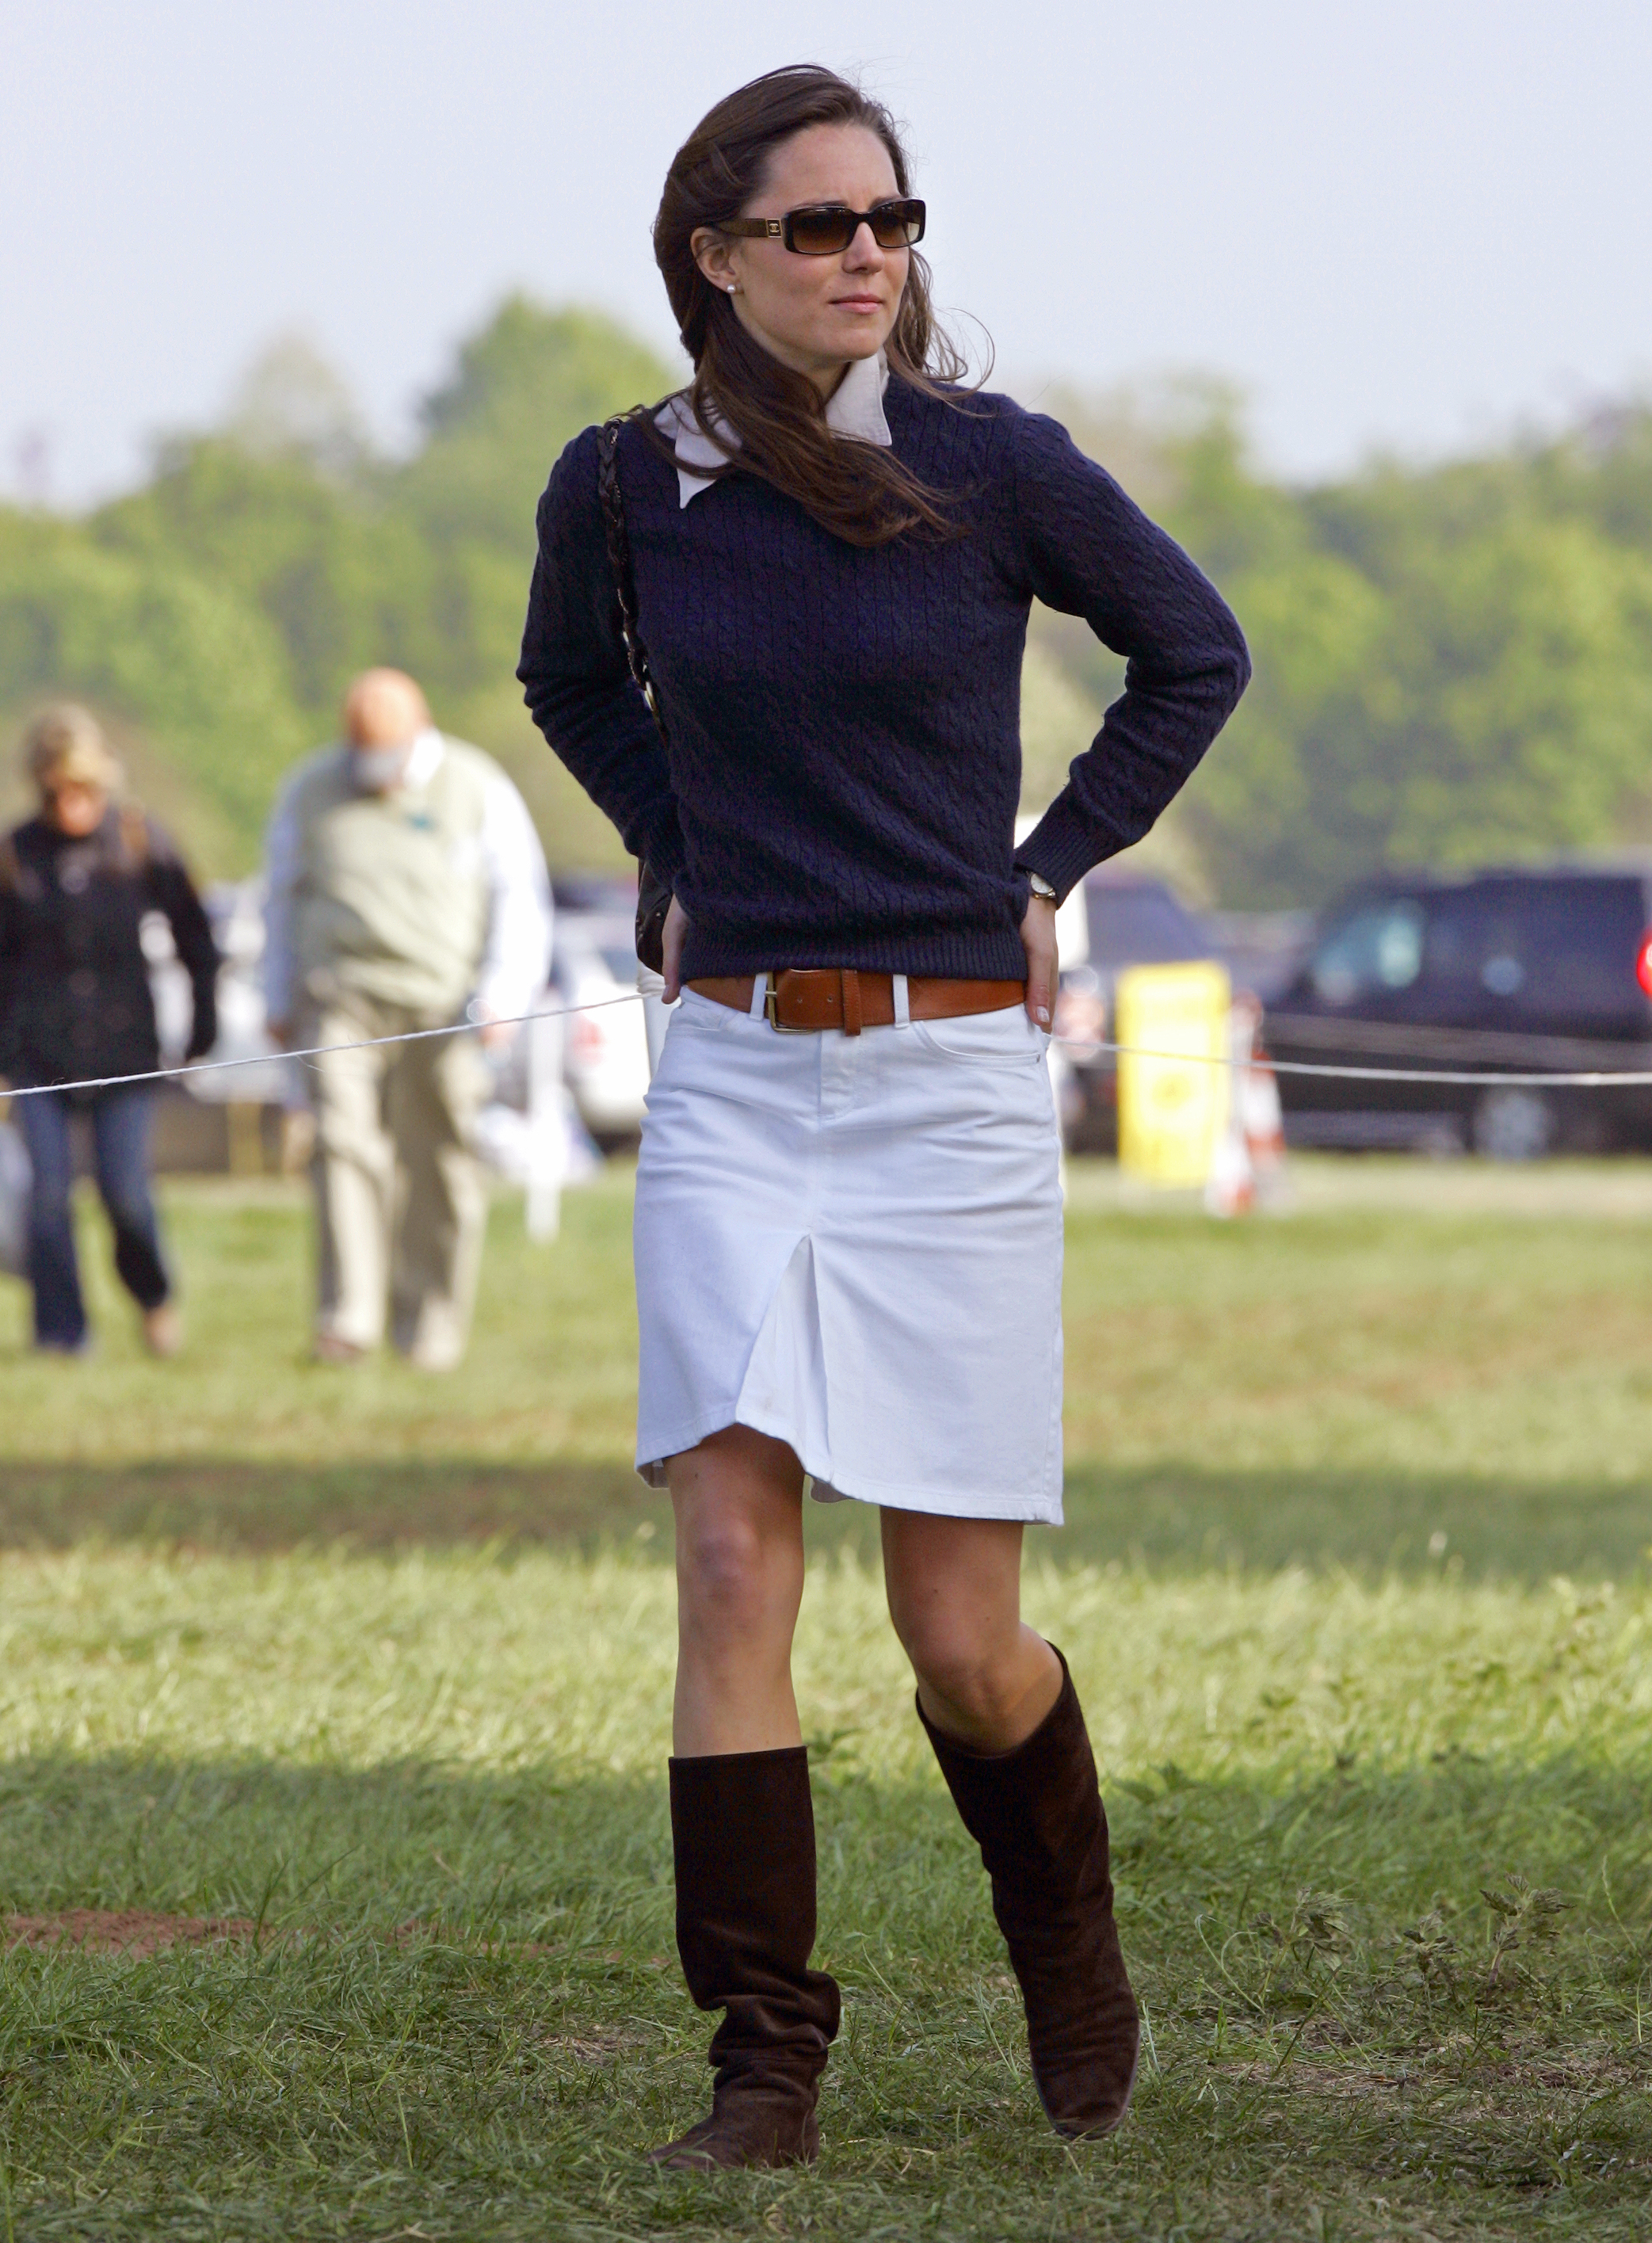 Princess of Prep
                              At the Badminton Horse Trials on May 4, 2007, Middleton wore a button-down shirt with a navy sweater and brown boots.